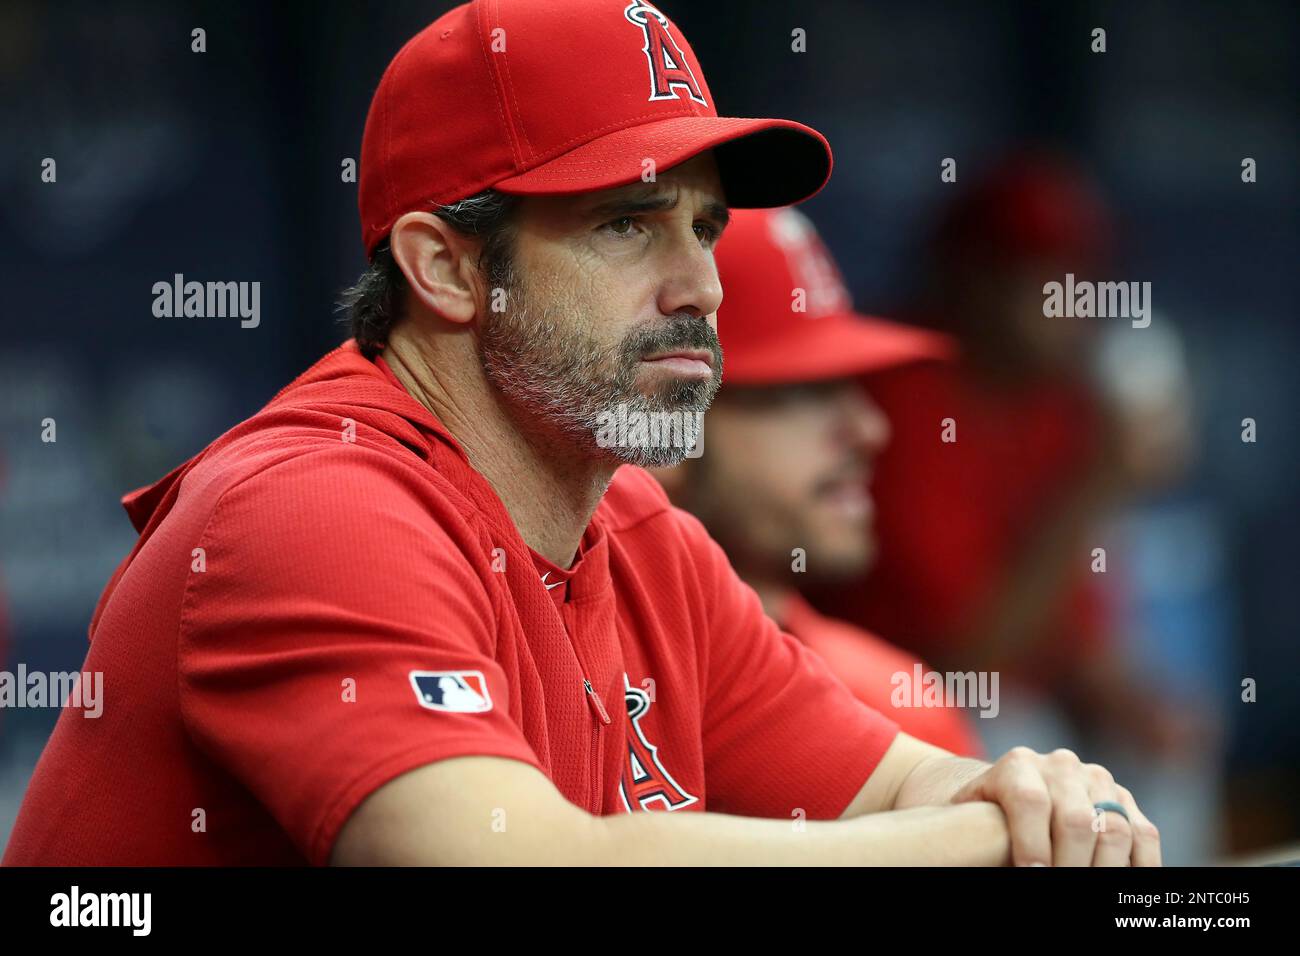 ST. PETERSBURG, FL - JUN 15: Angels Manager Brad Ausmus watches the action  on the field during the MLB regular season game between the Los Angeles  Angels and the Tampa Bay Rays